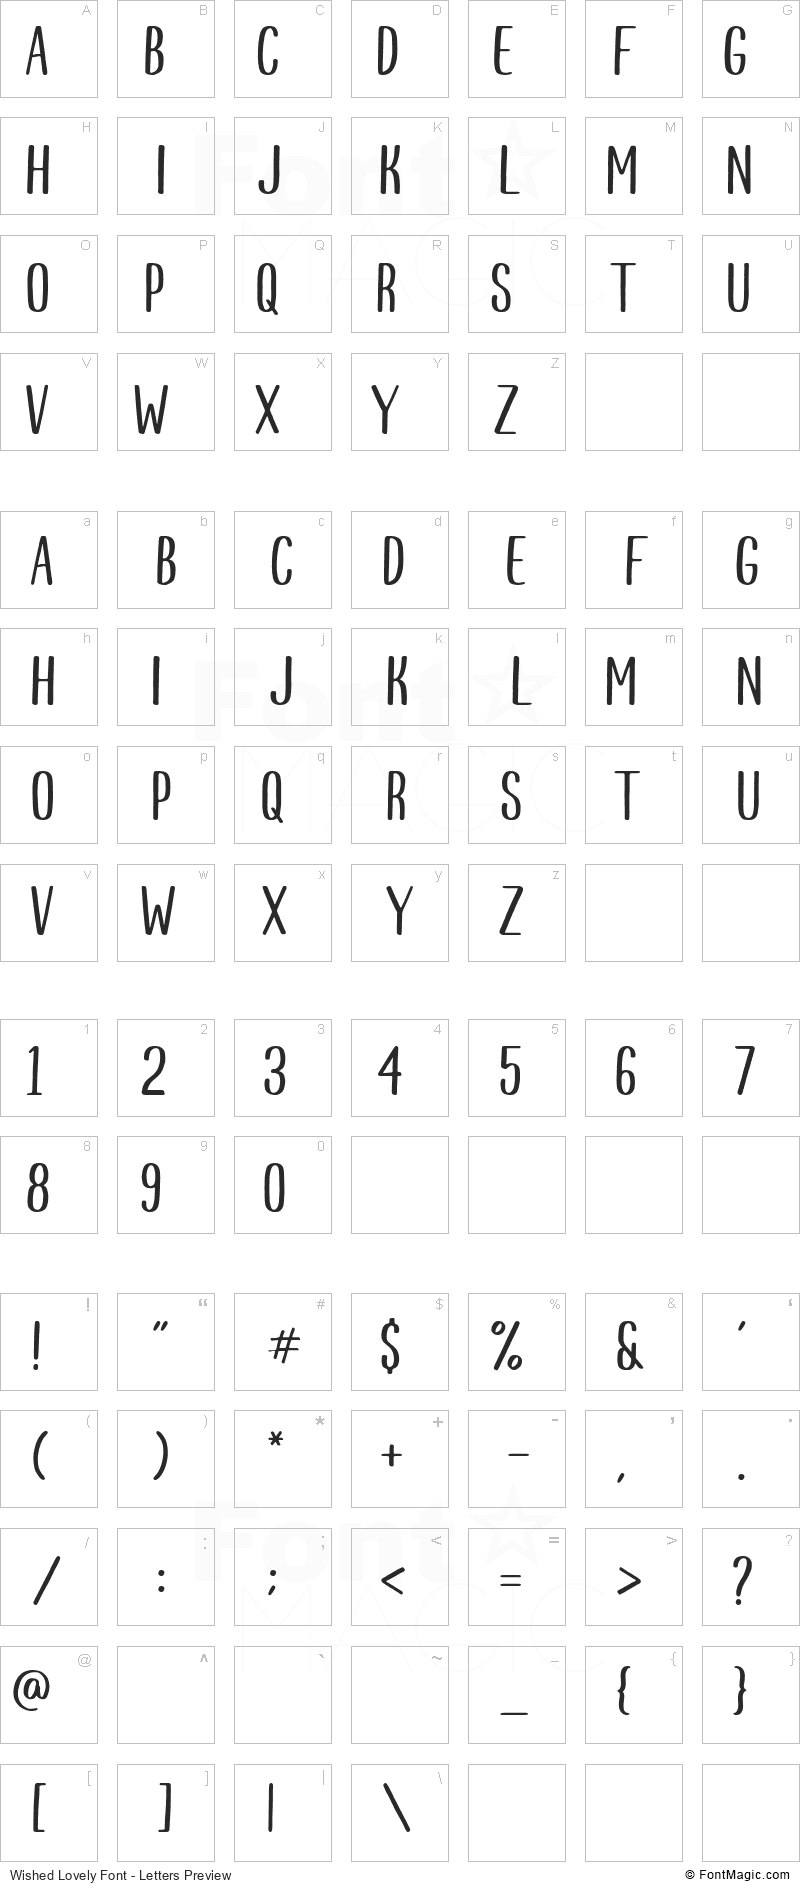 Wished Lovely Font - All Latters Preview Chart